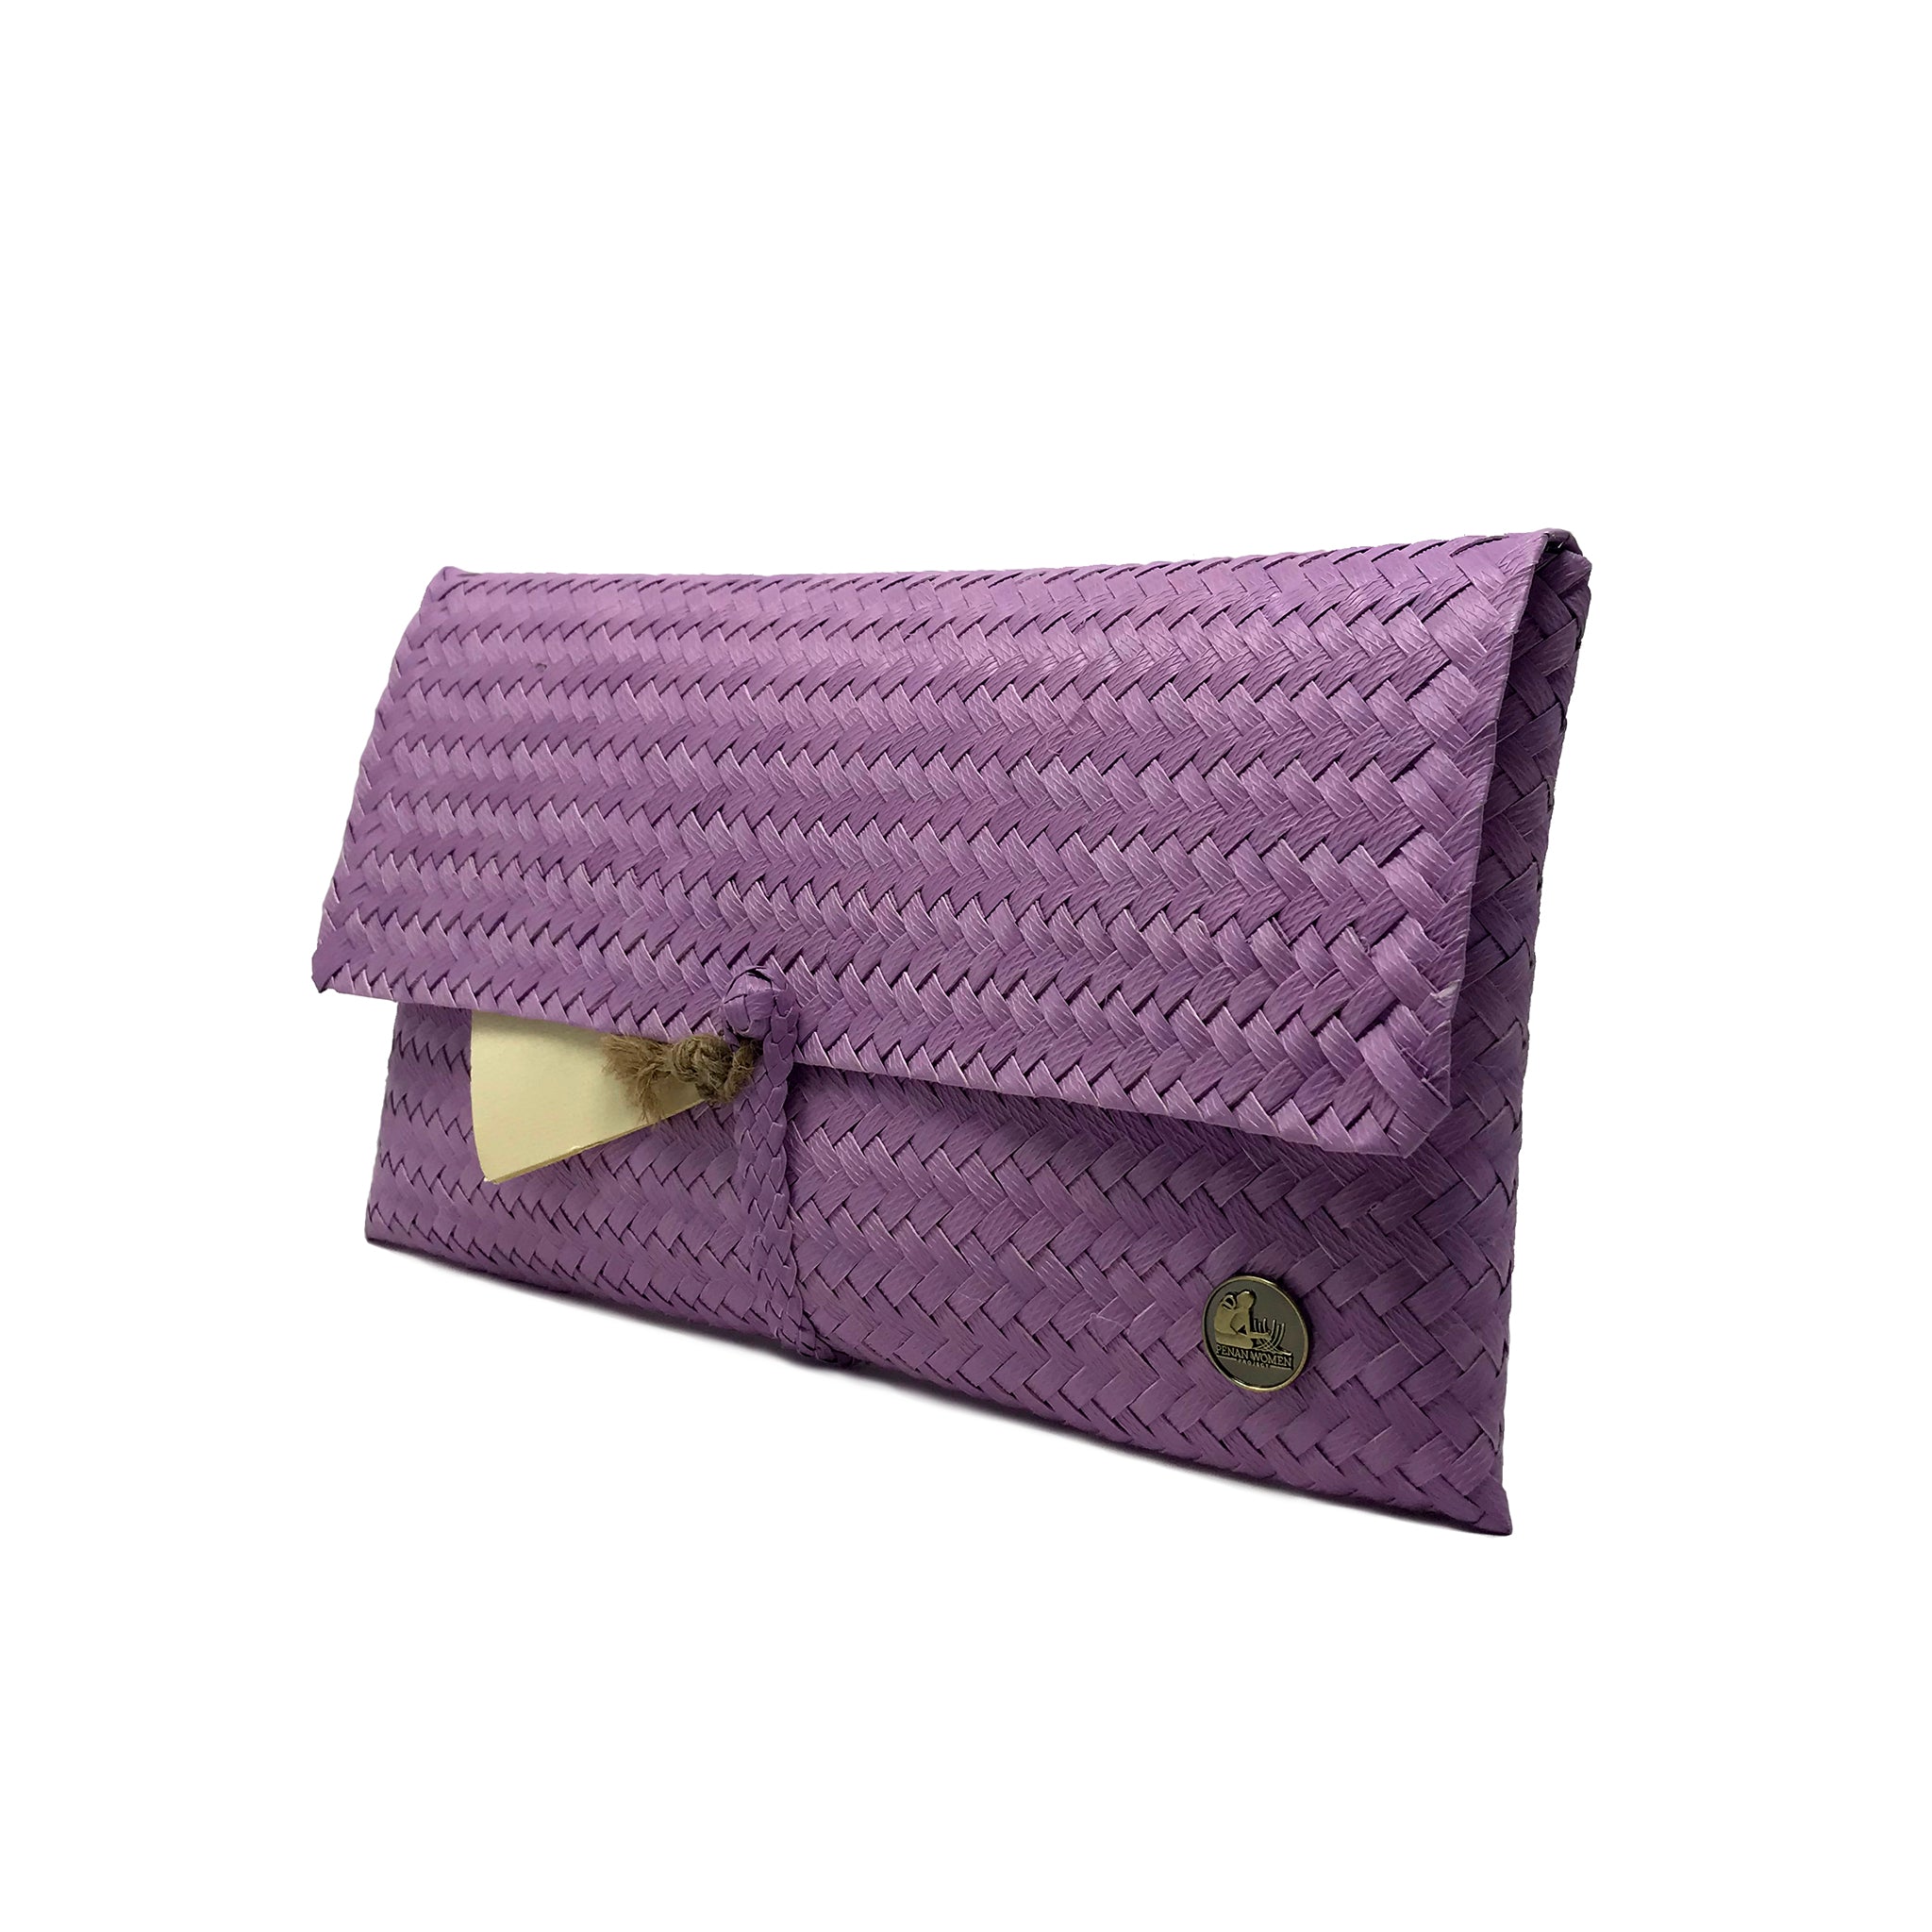 Lavender clutch at a 45-degree angle.